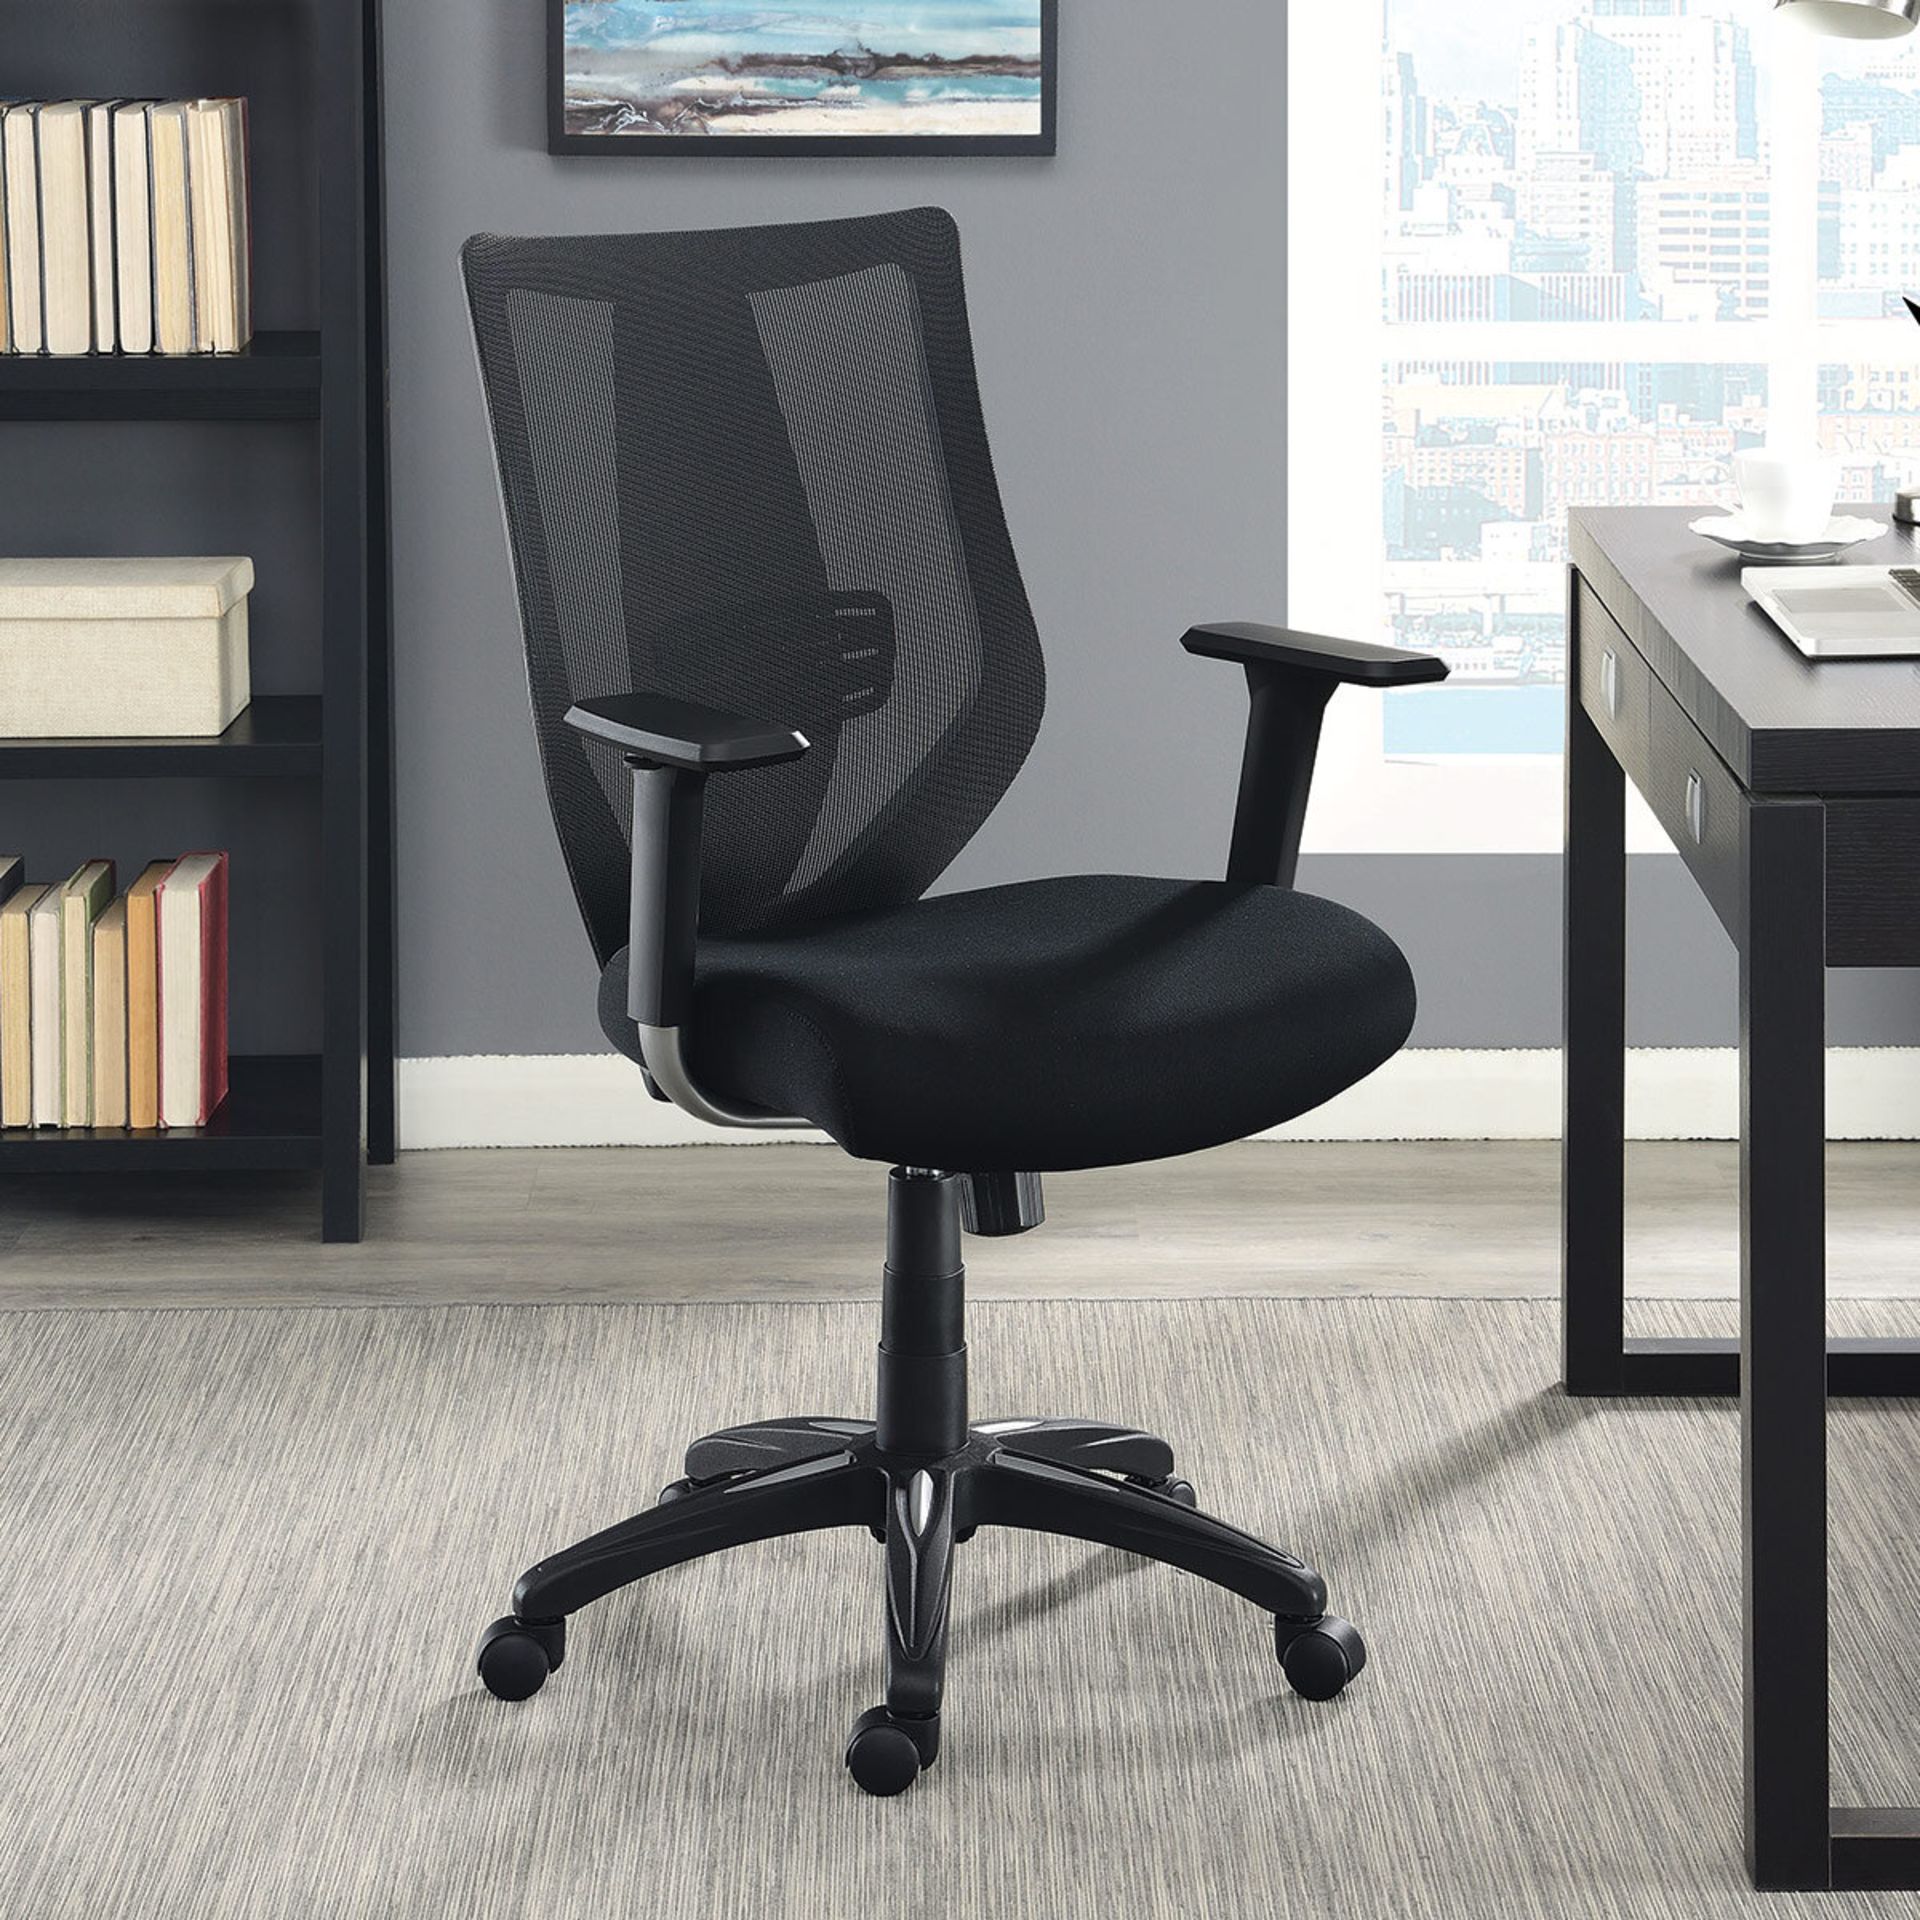 1 TRUE INNOVATIONS MESH OFFICE CHAIR RRP Â£149 (DOESN'T STAY UP)